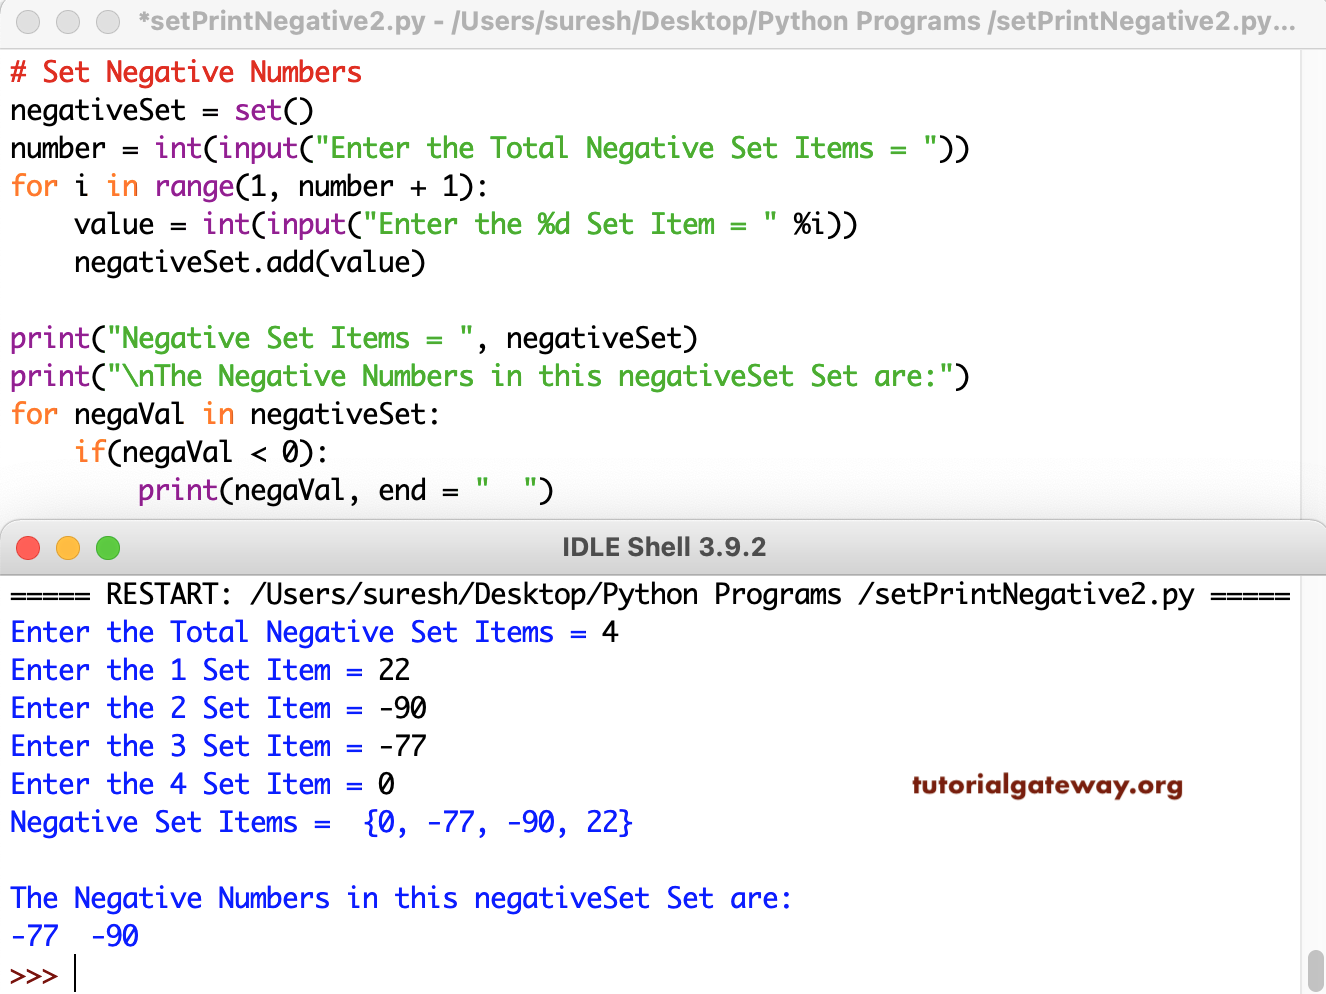 Python Program to Print Negative Numbers in Set 2